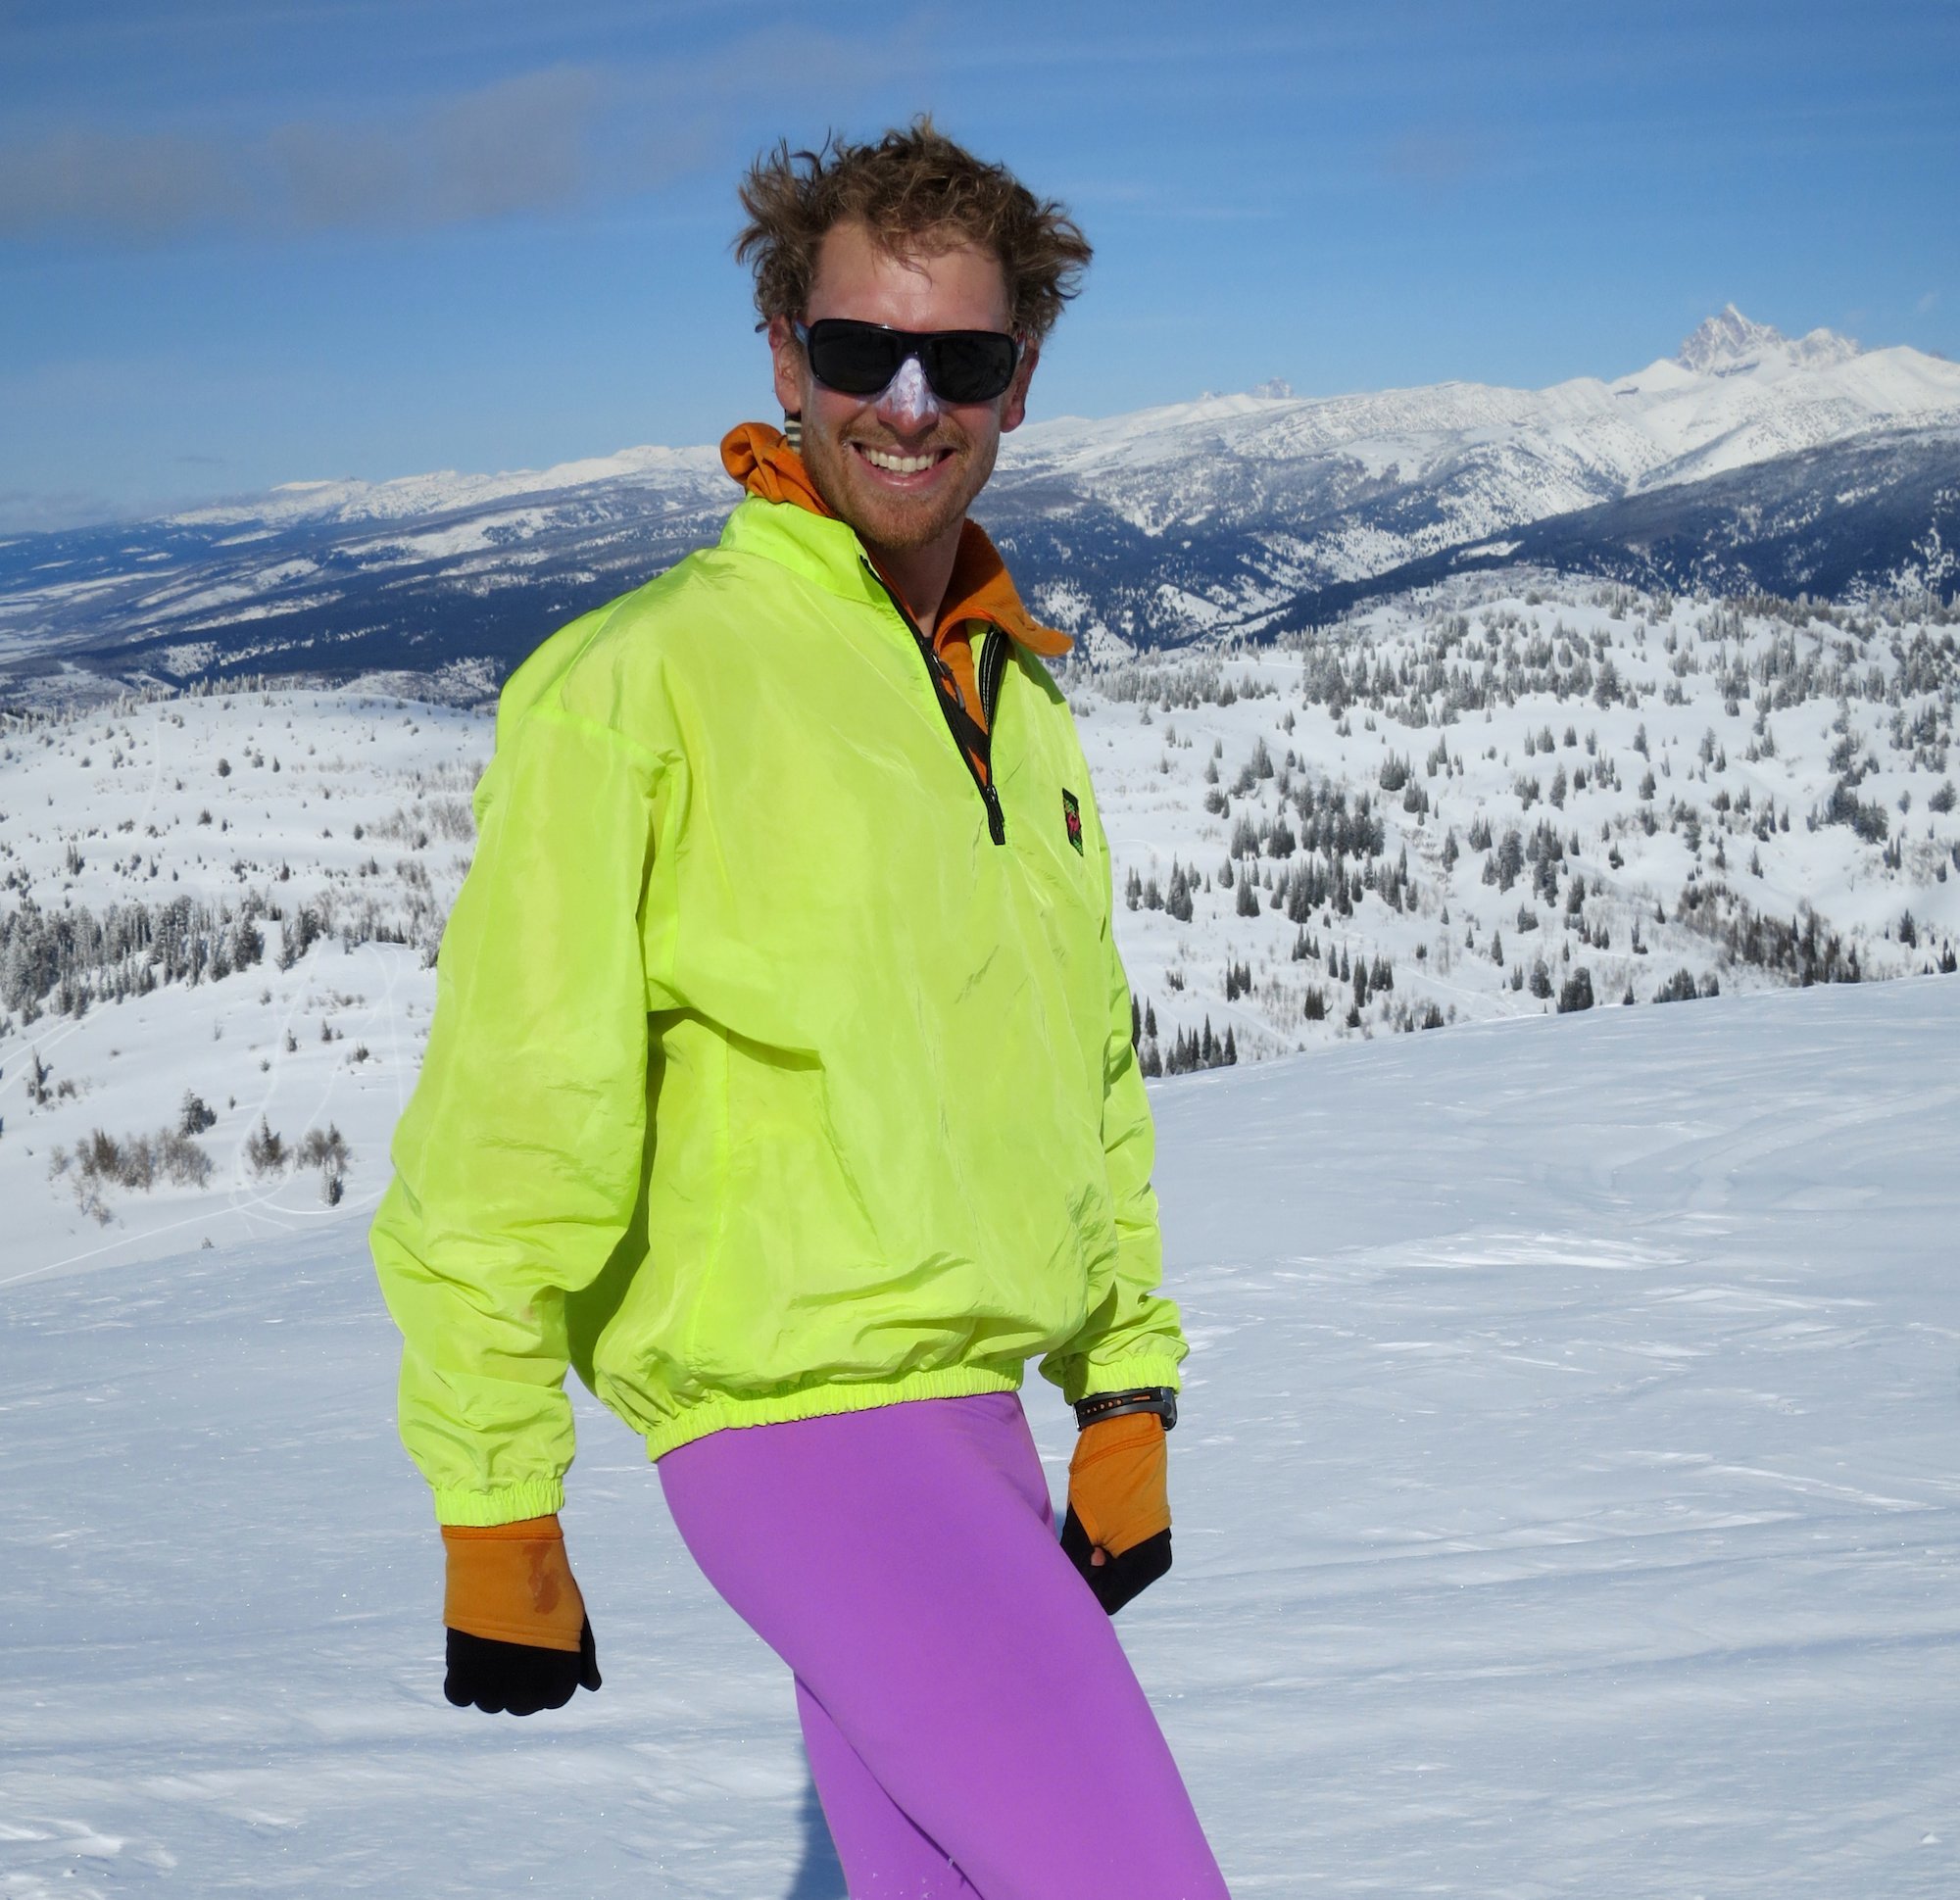 NOLS participant with fluorescent jacket and brightly colored tights models winter fashion